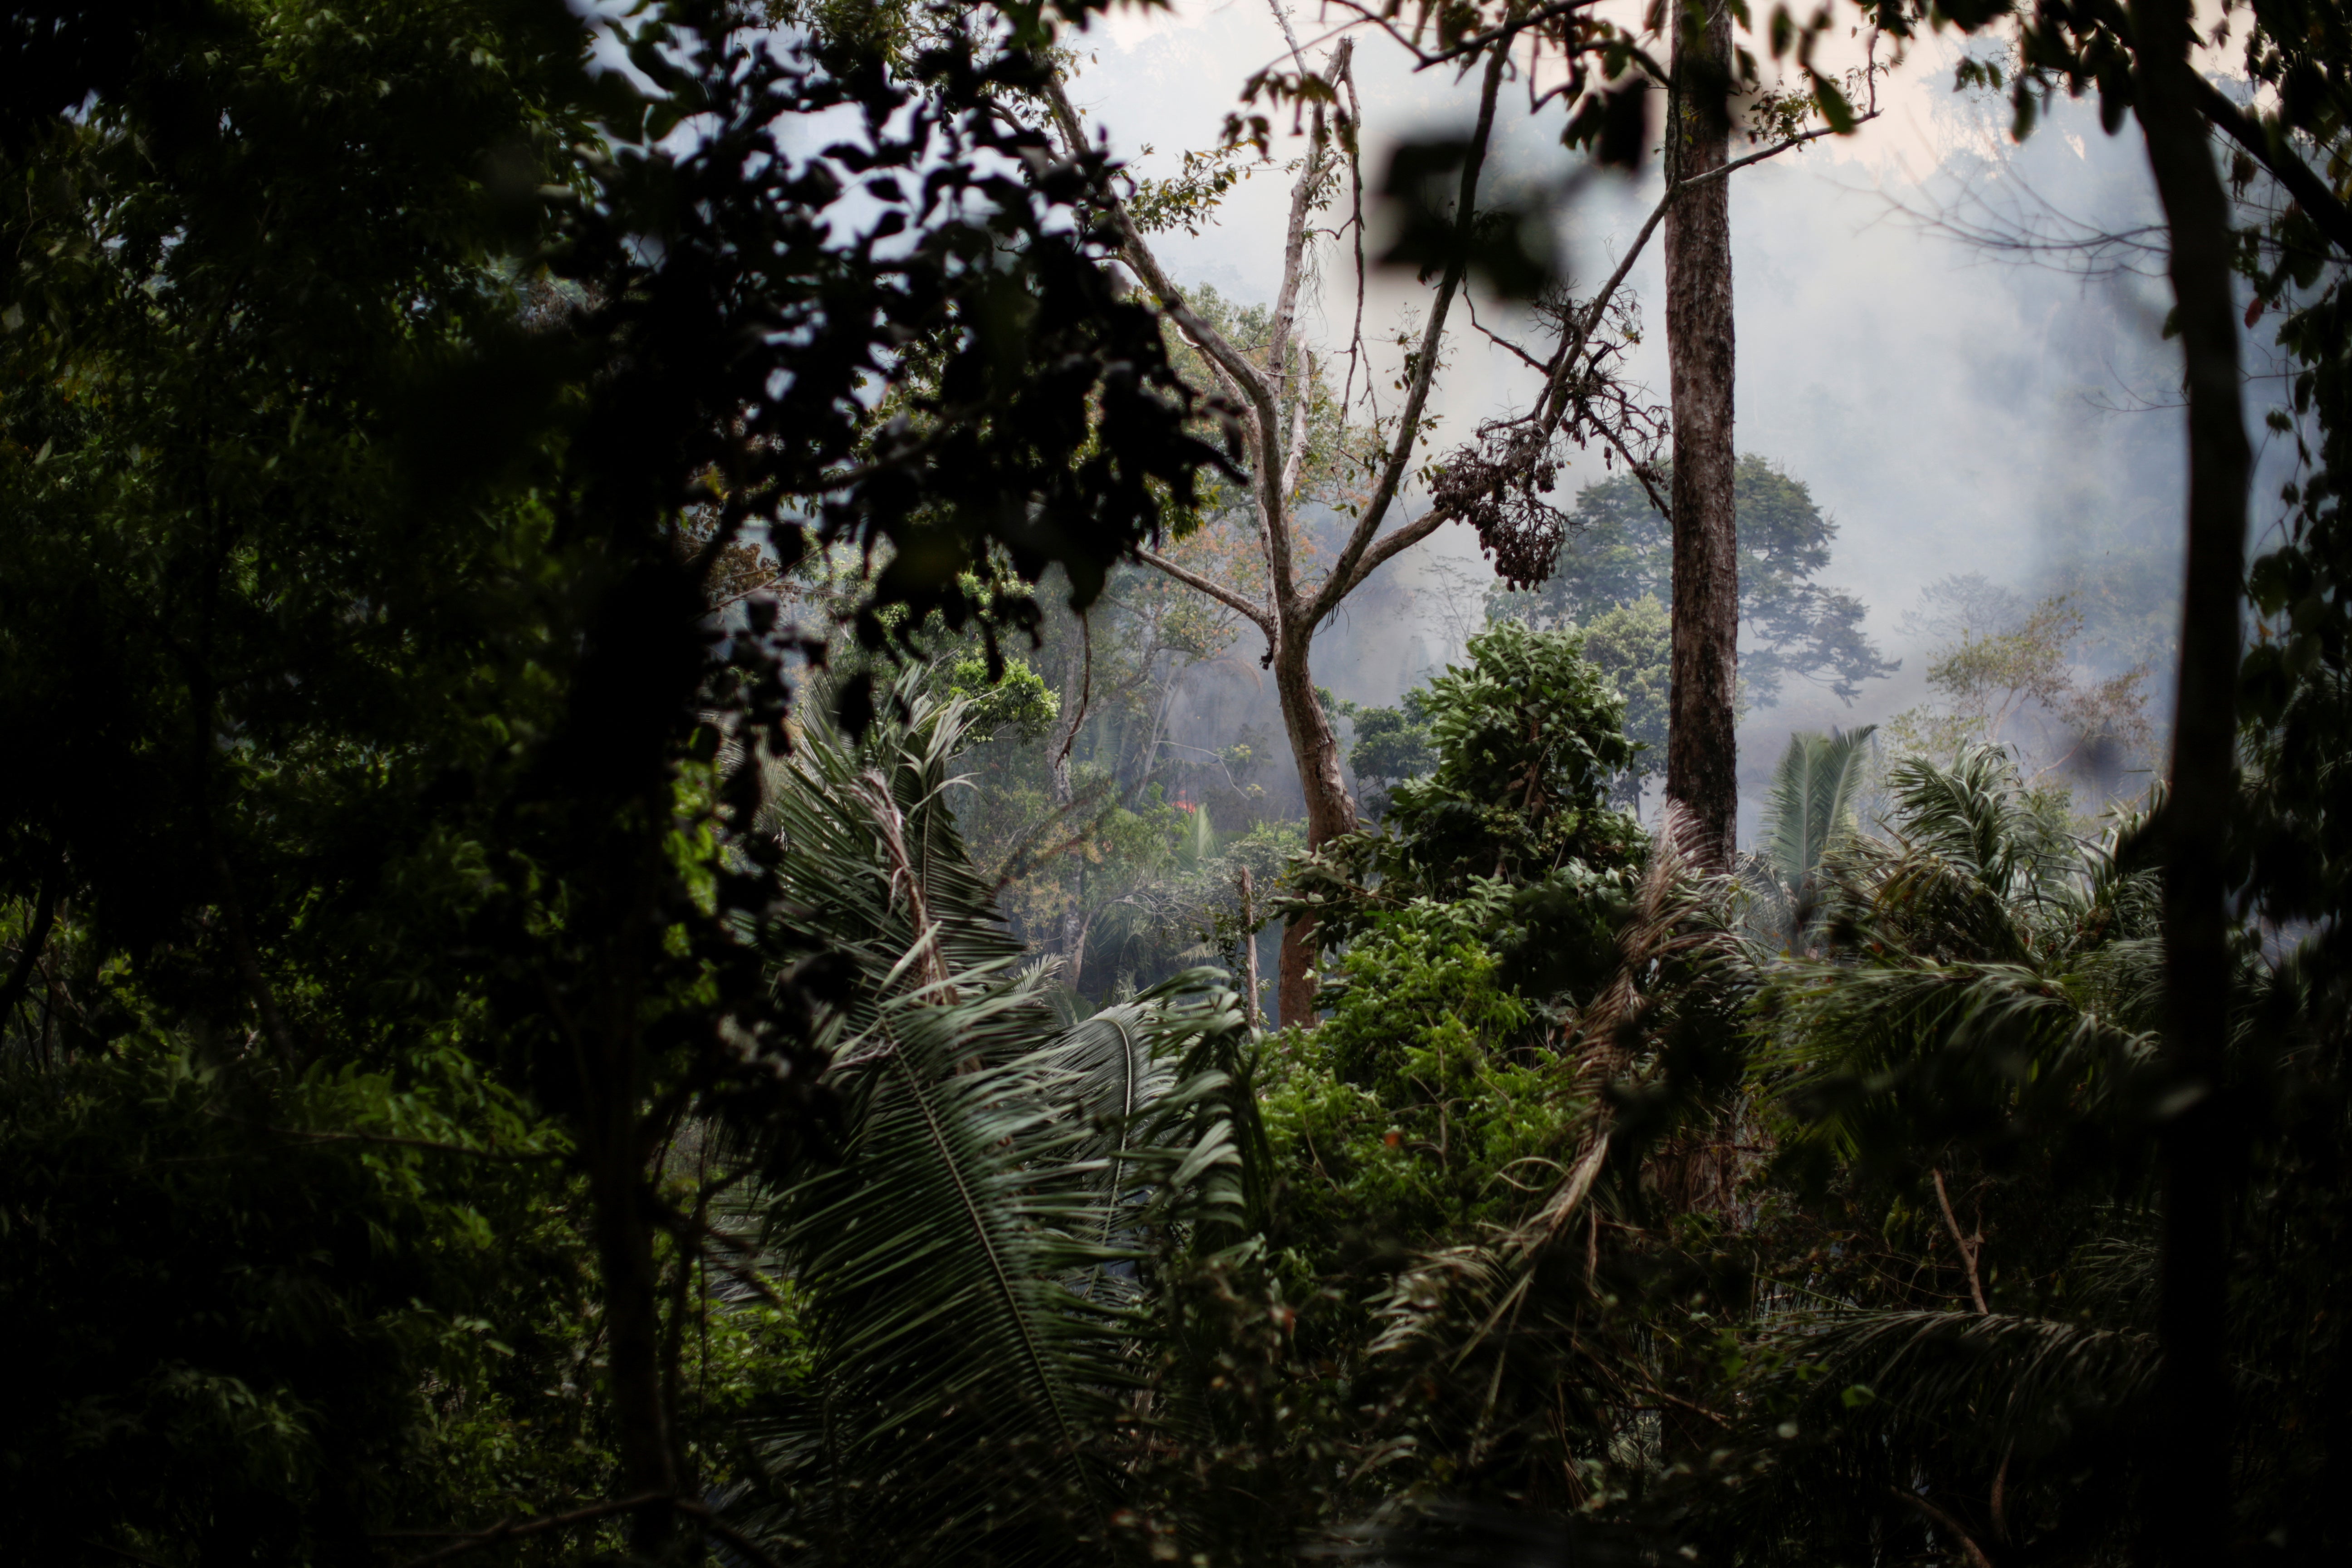 A tract of the Amazon jungle near Ouro Preto, Rondonia. In the dry season ranchers and land speculators set fires to clear deforested woodland for pasture. Blazes can rage out of control, and wildlife flee from the smoke and flames